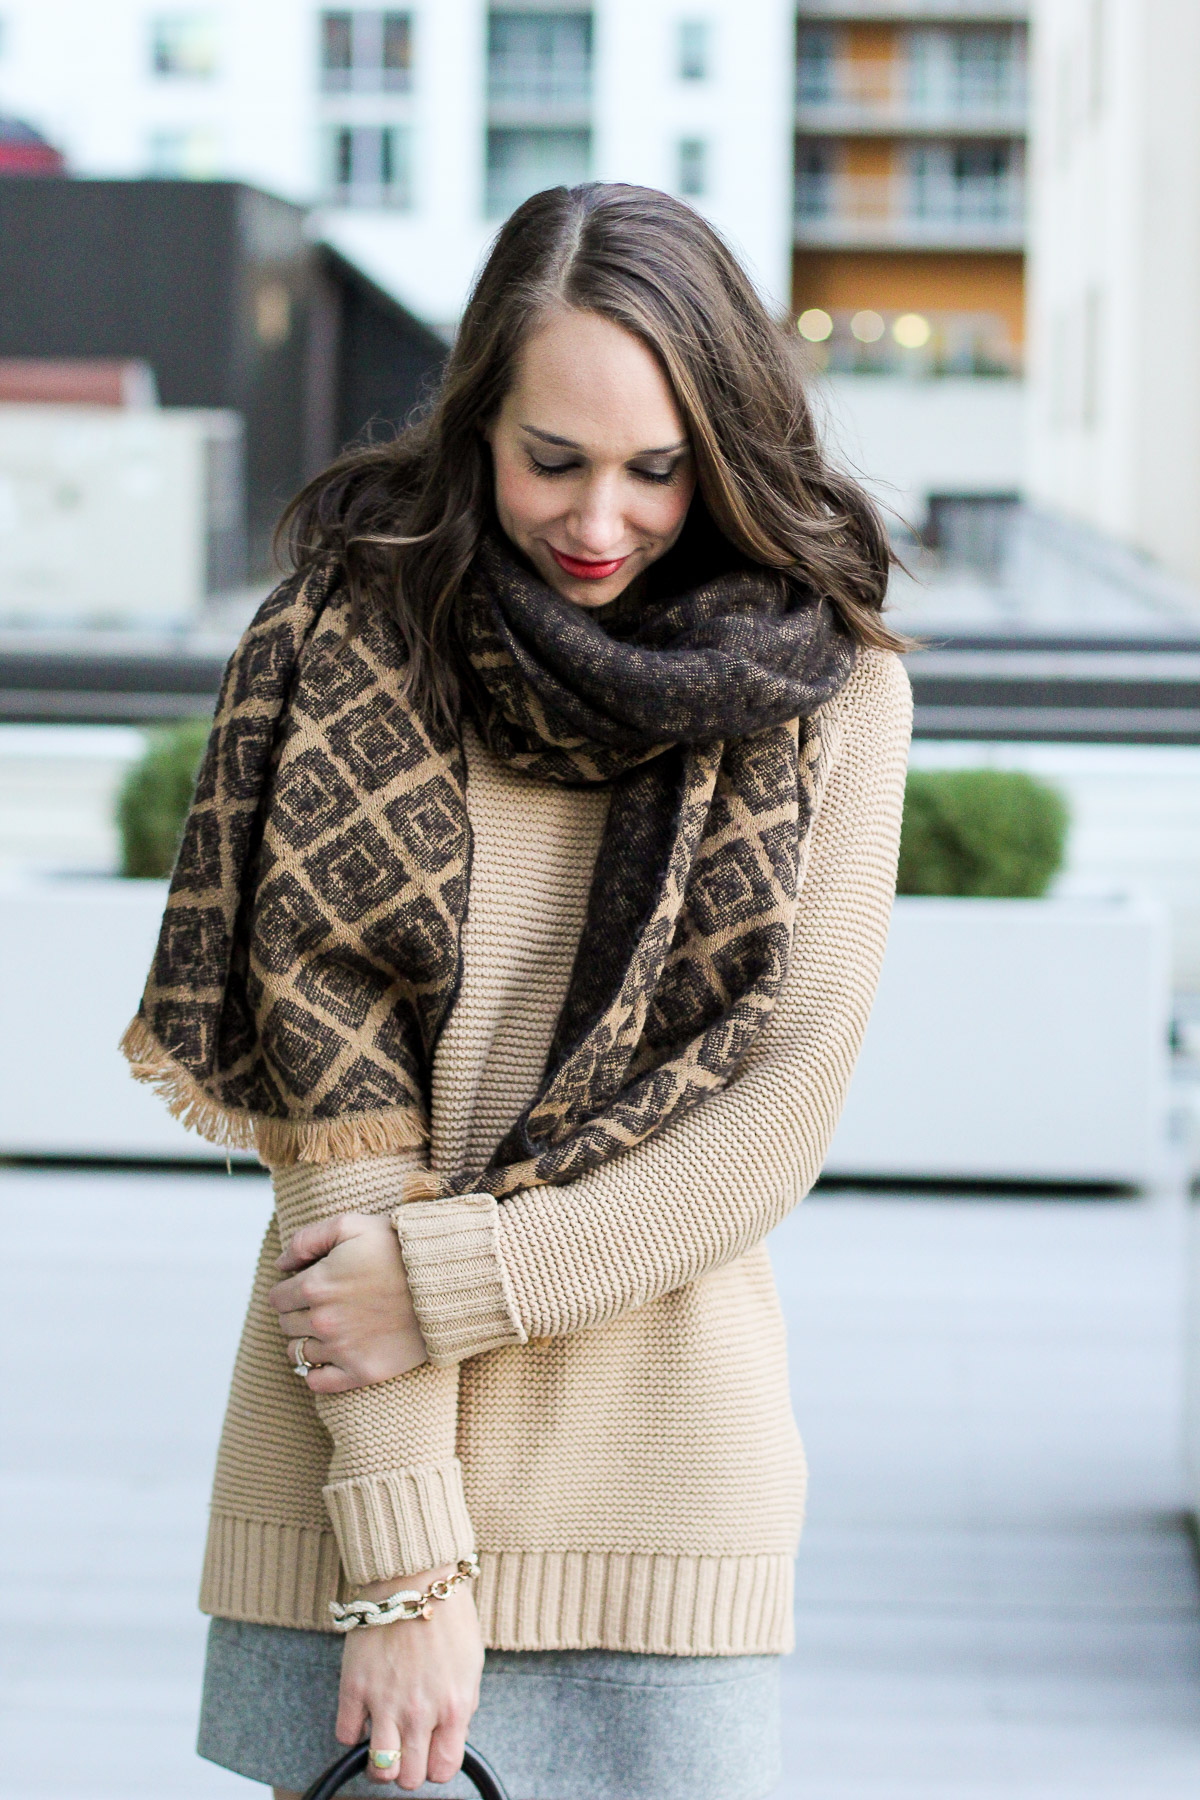 Thigh High: Lowland Boots — The Fox & She